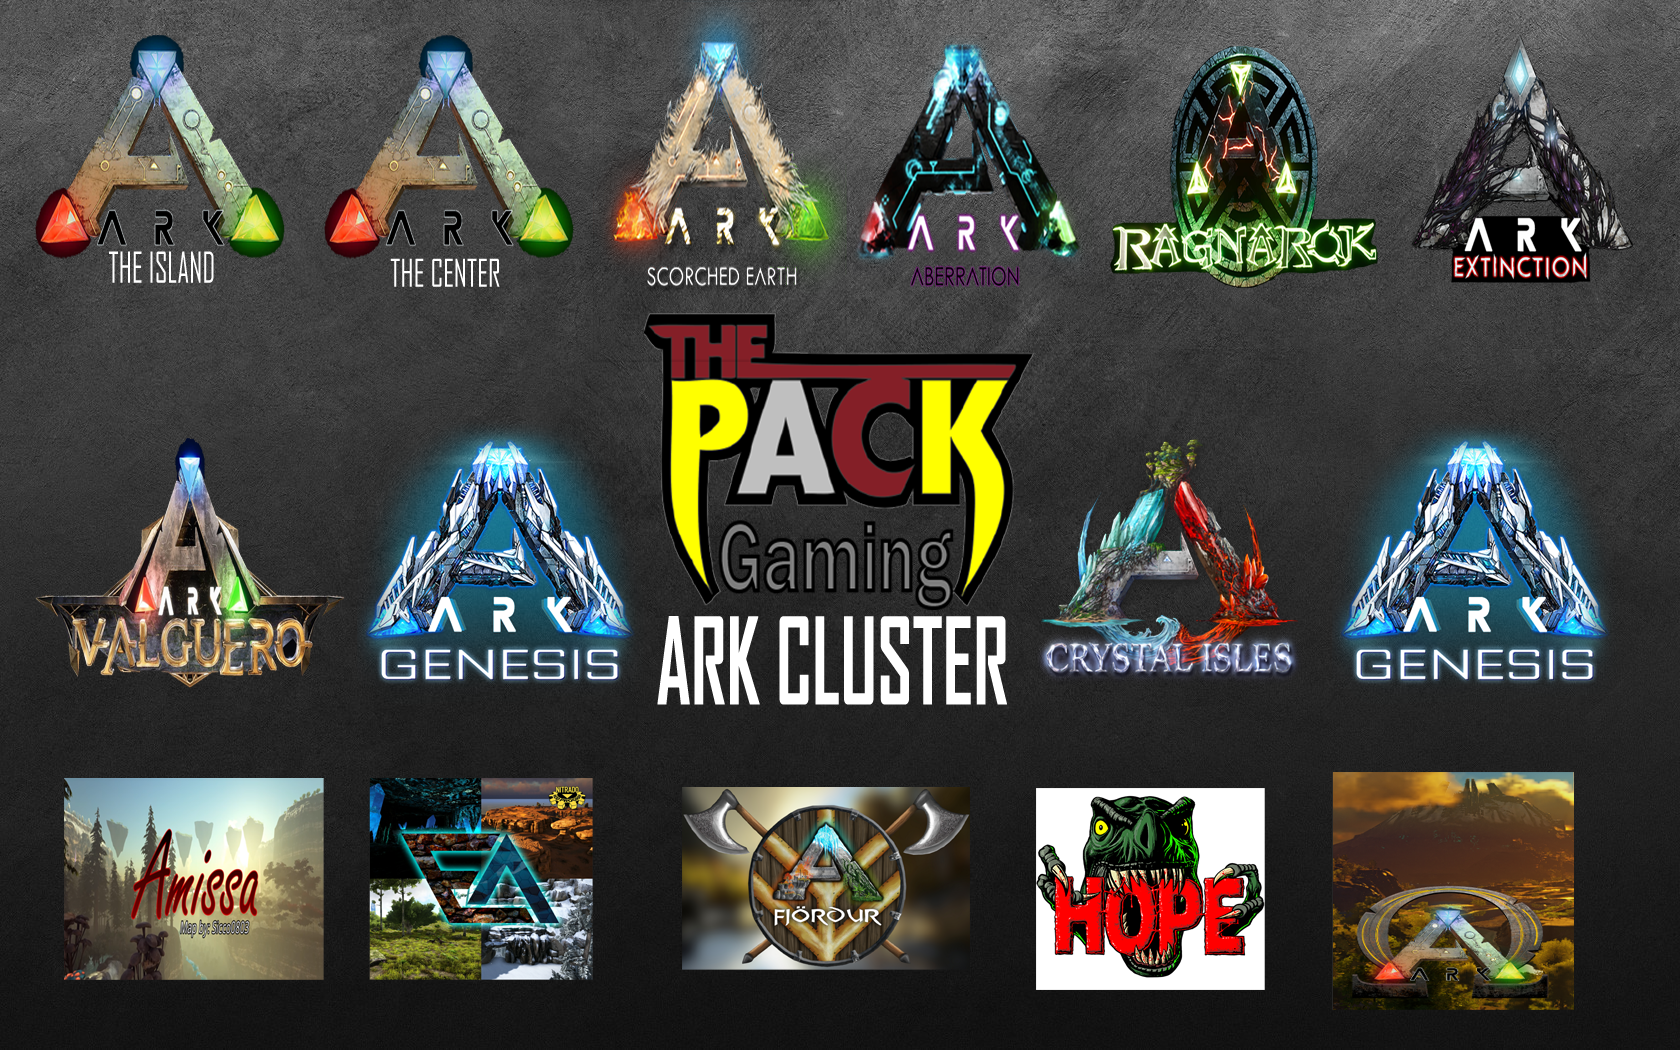 Our Ark Survival Cluster The Pack Gaming